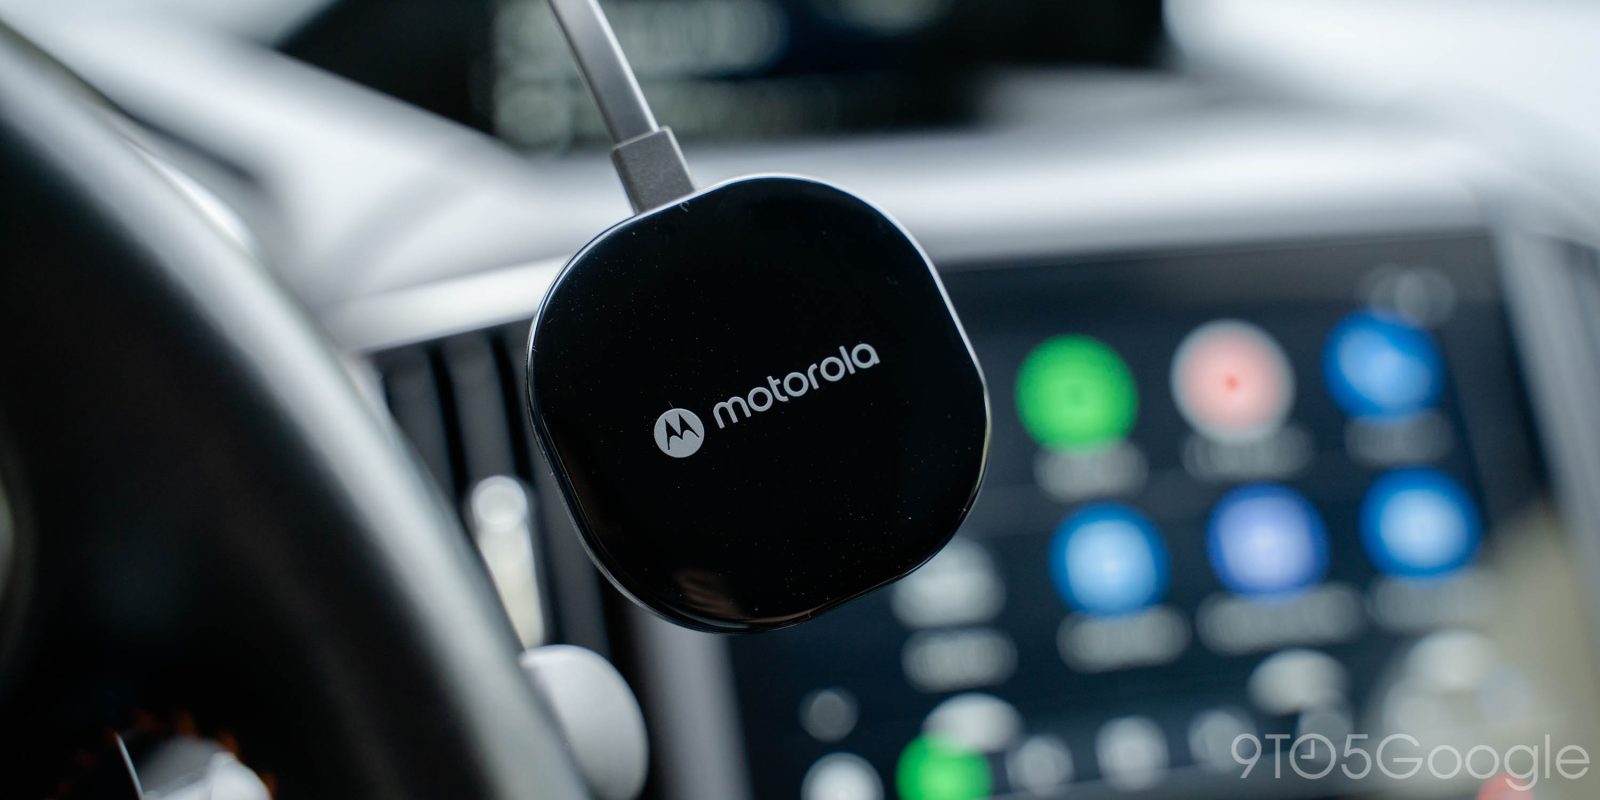 Where to buy Motorola MA1 dongle for wireless Android Auto - 9to5Google